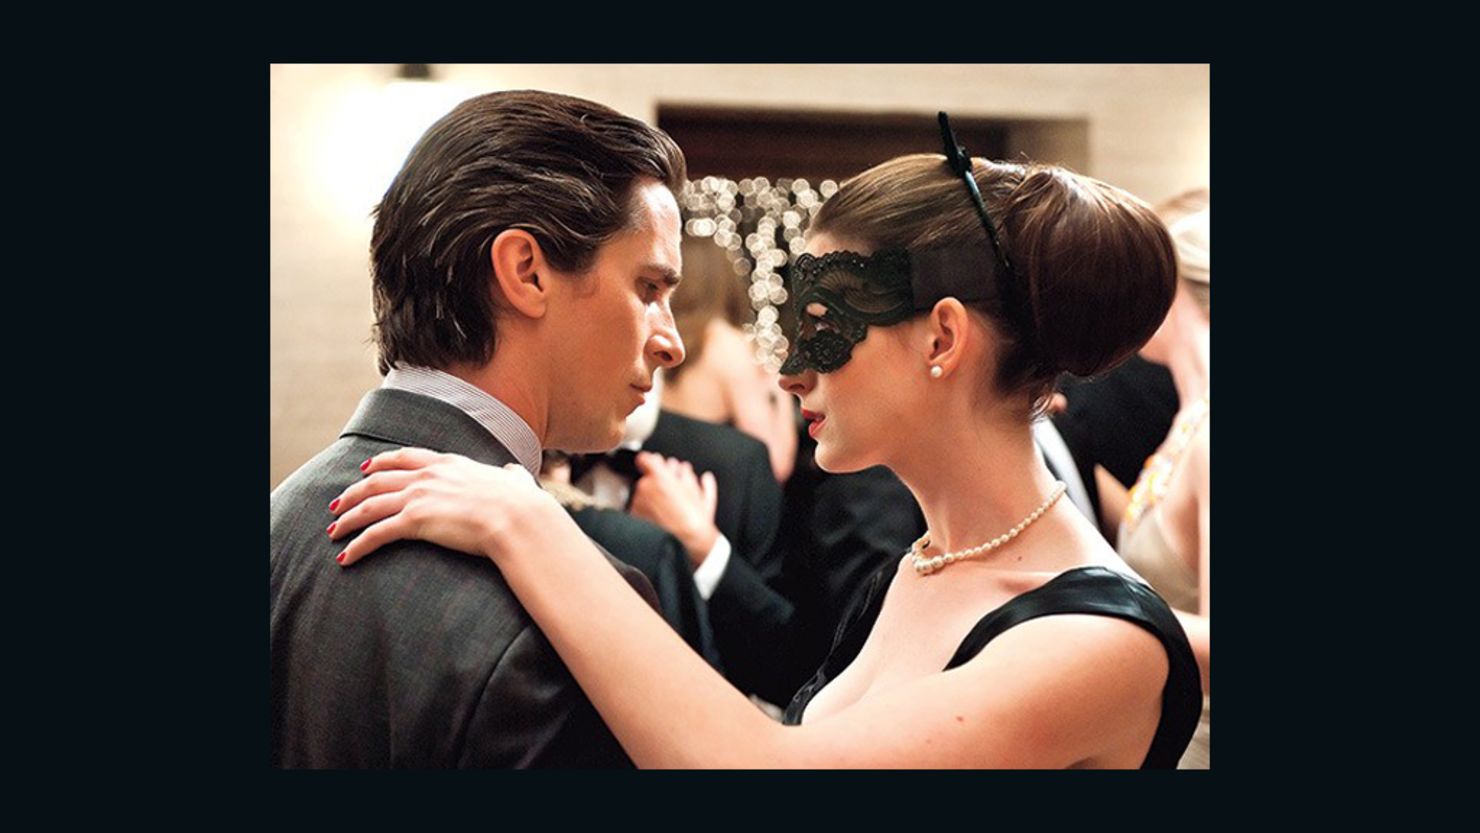 Christian Bale and Anne Hathaway star in "The Dark Knight Rises."